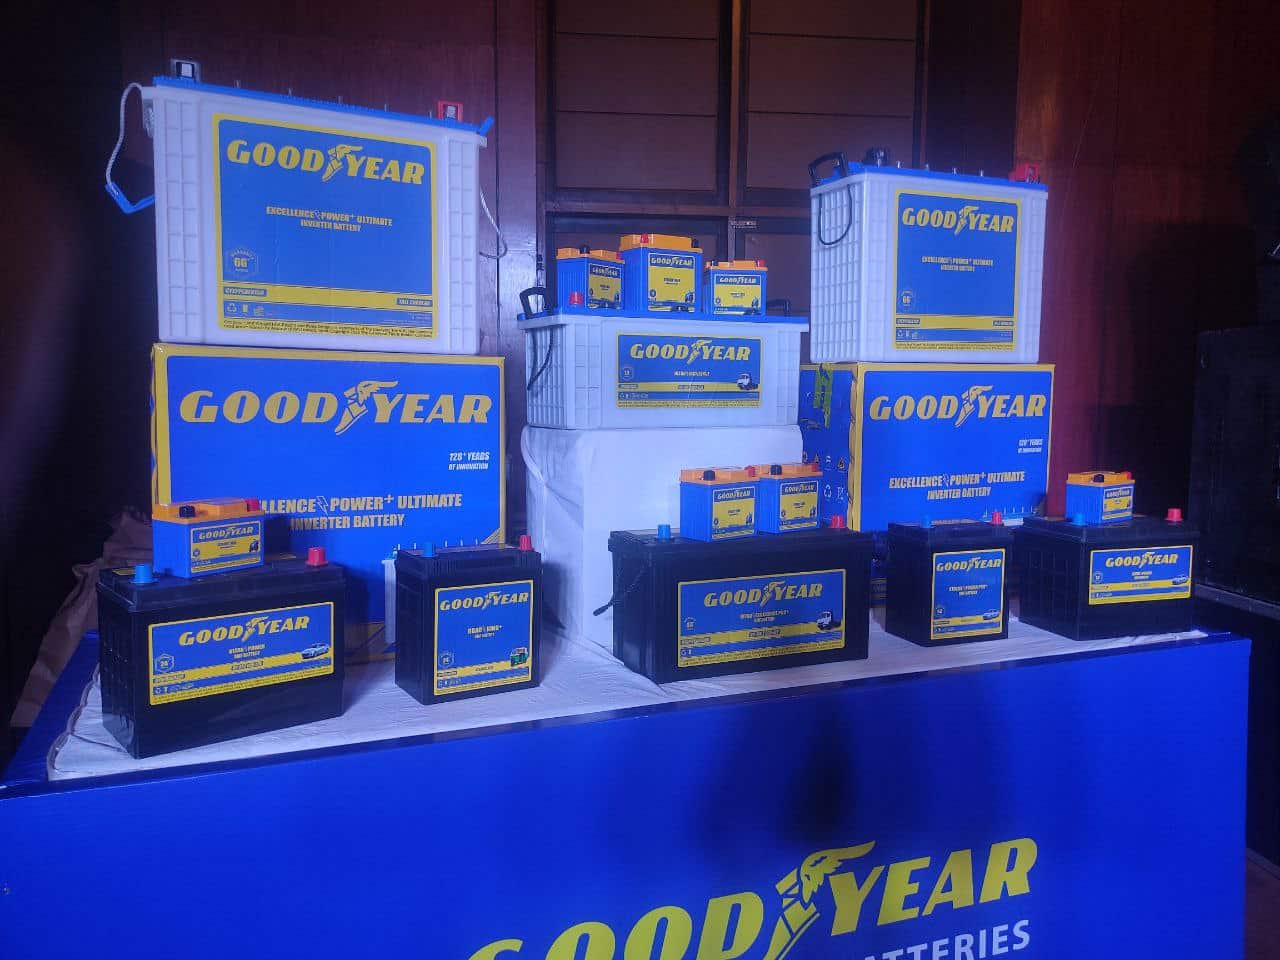 Assurance Intl and Goodyear announces new range of filters and